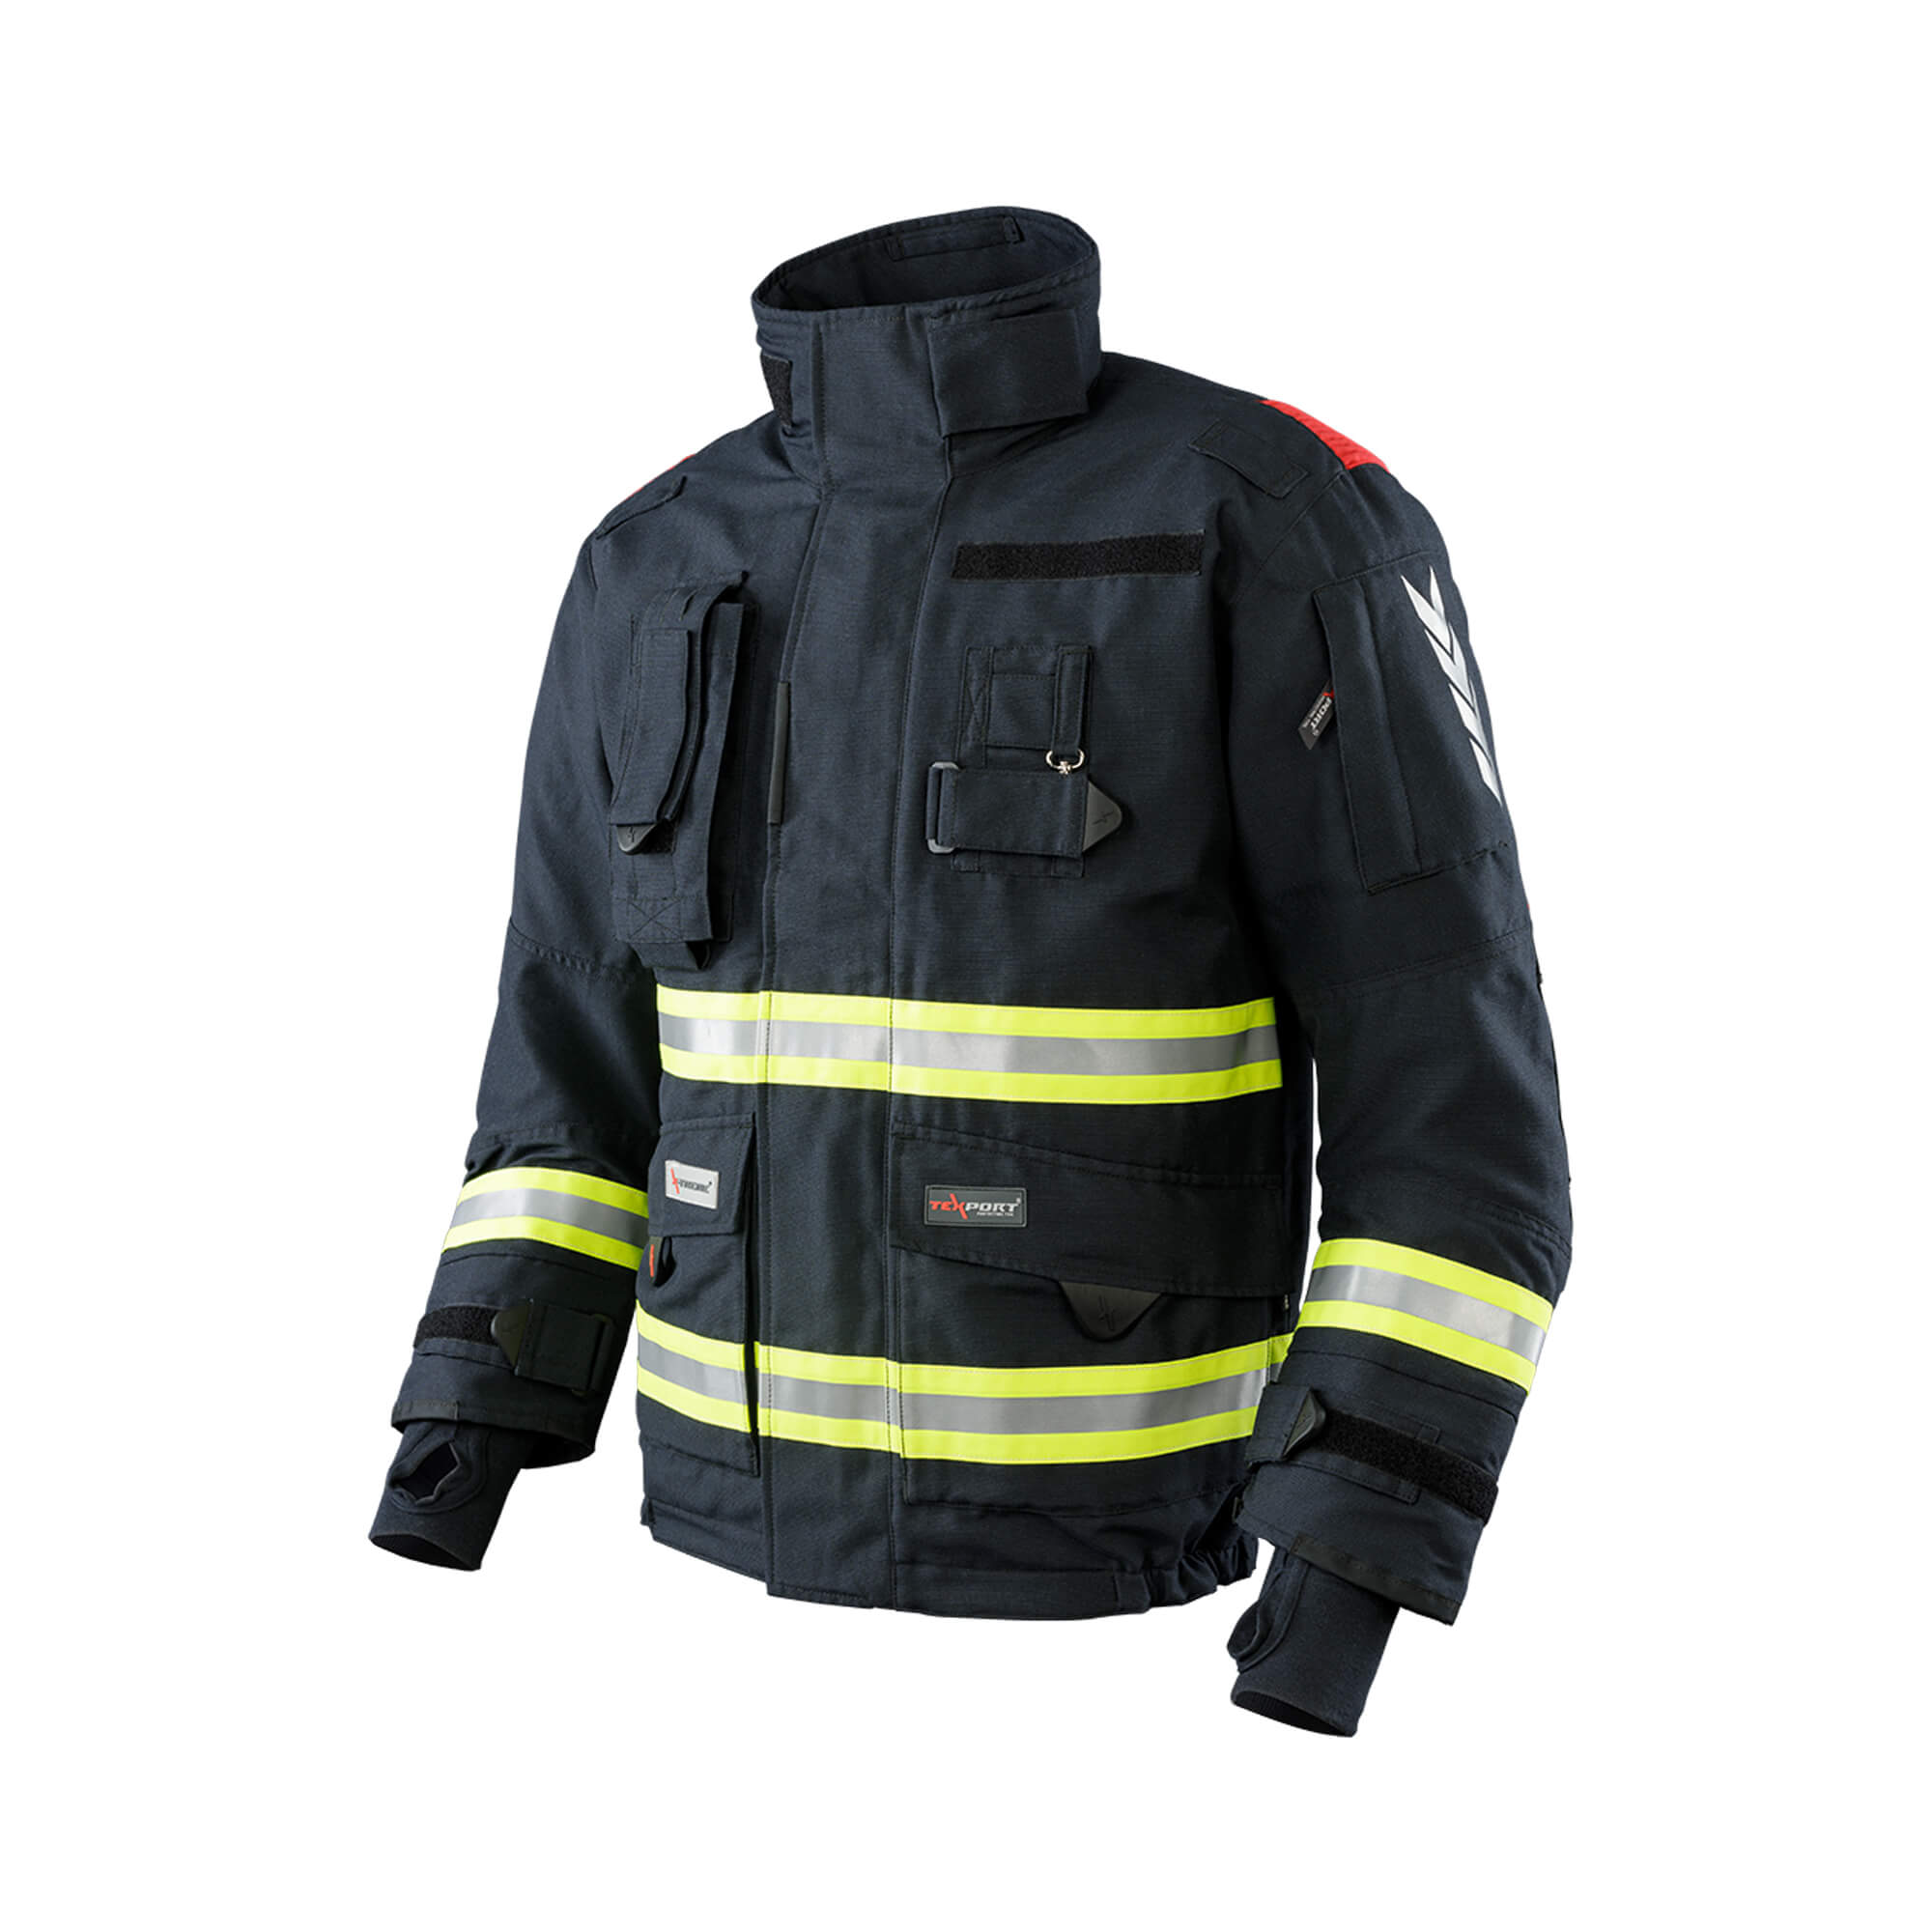 Firefighter Suit for interventions Texport Fire Stretch